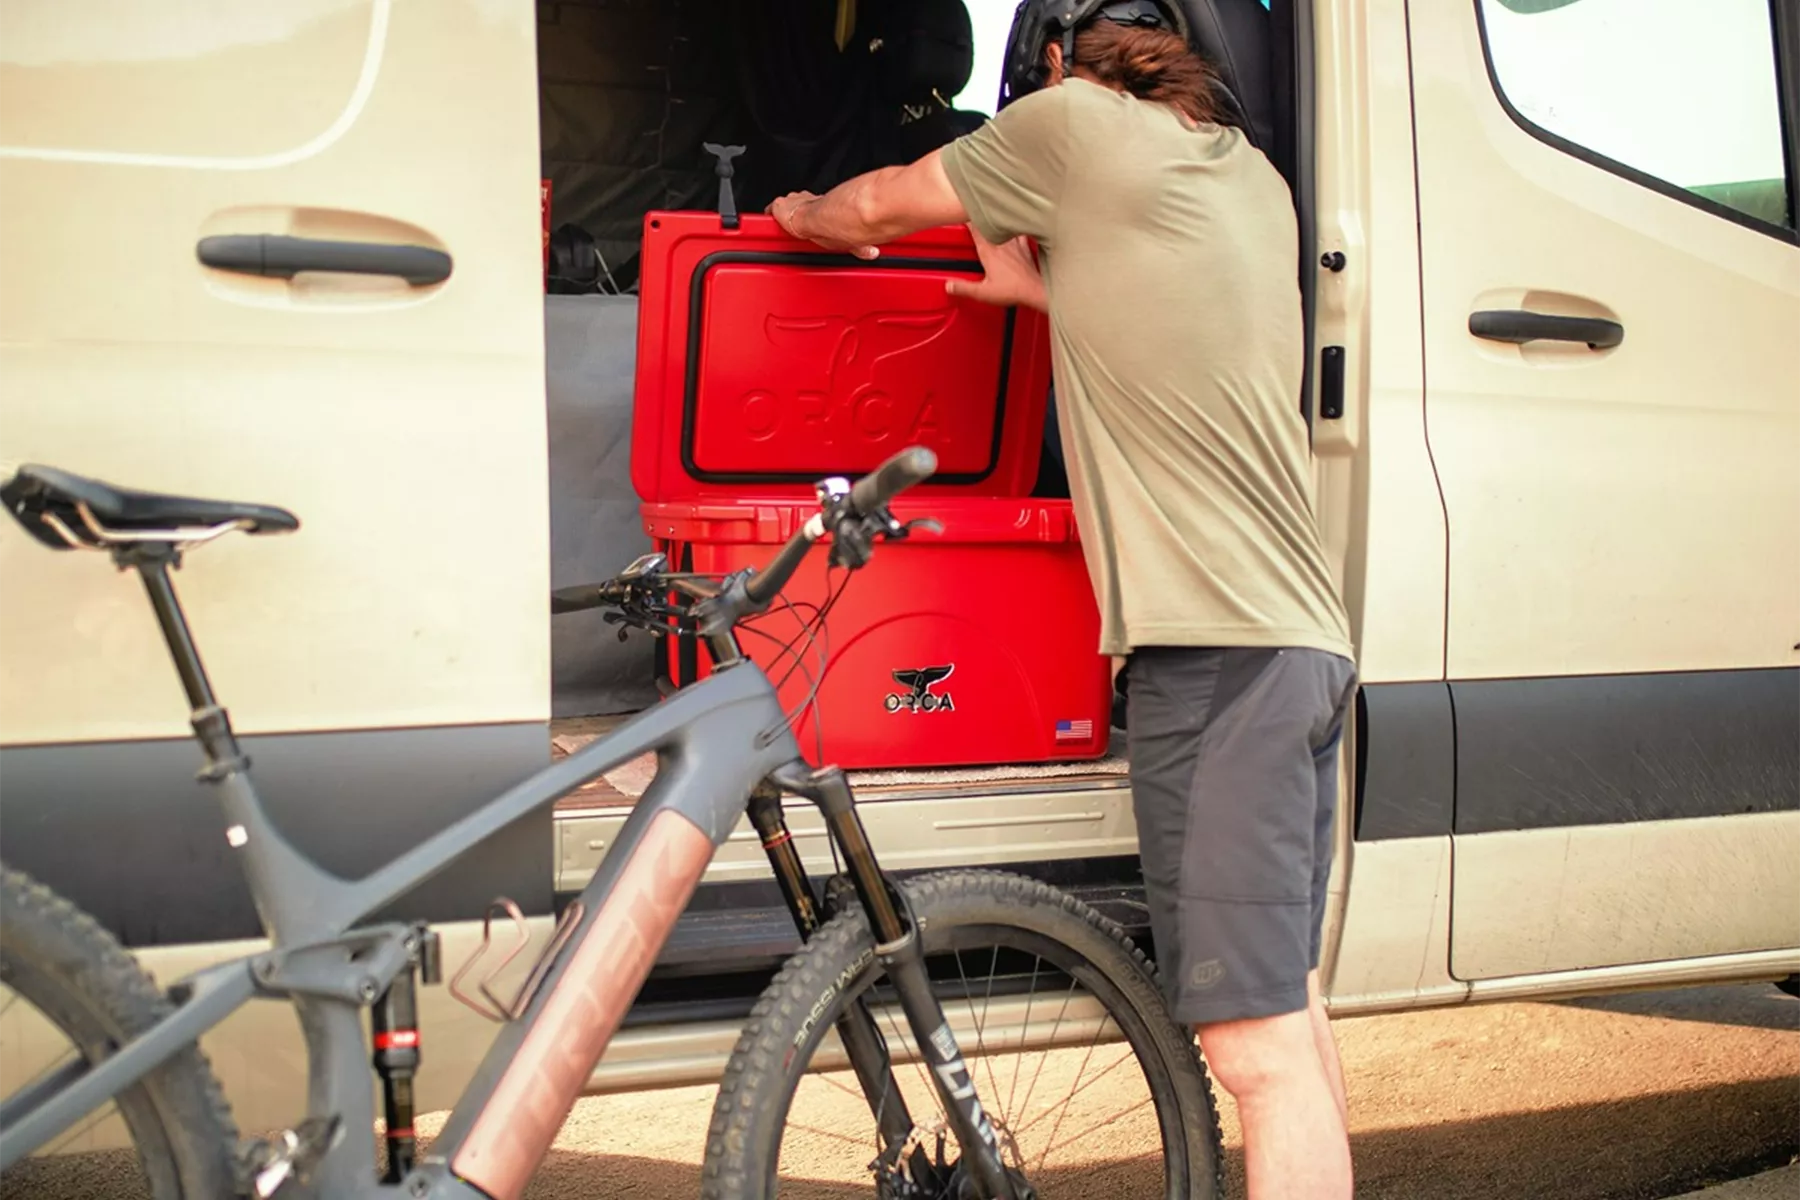 Man on a trip opening a red Orca cooler that is inside of a van